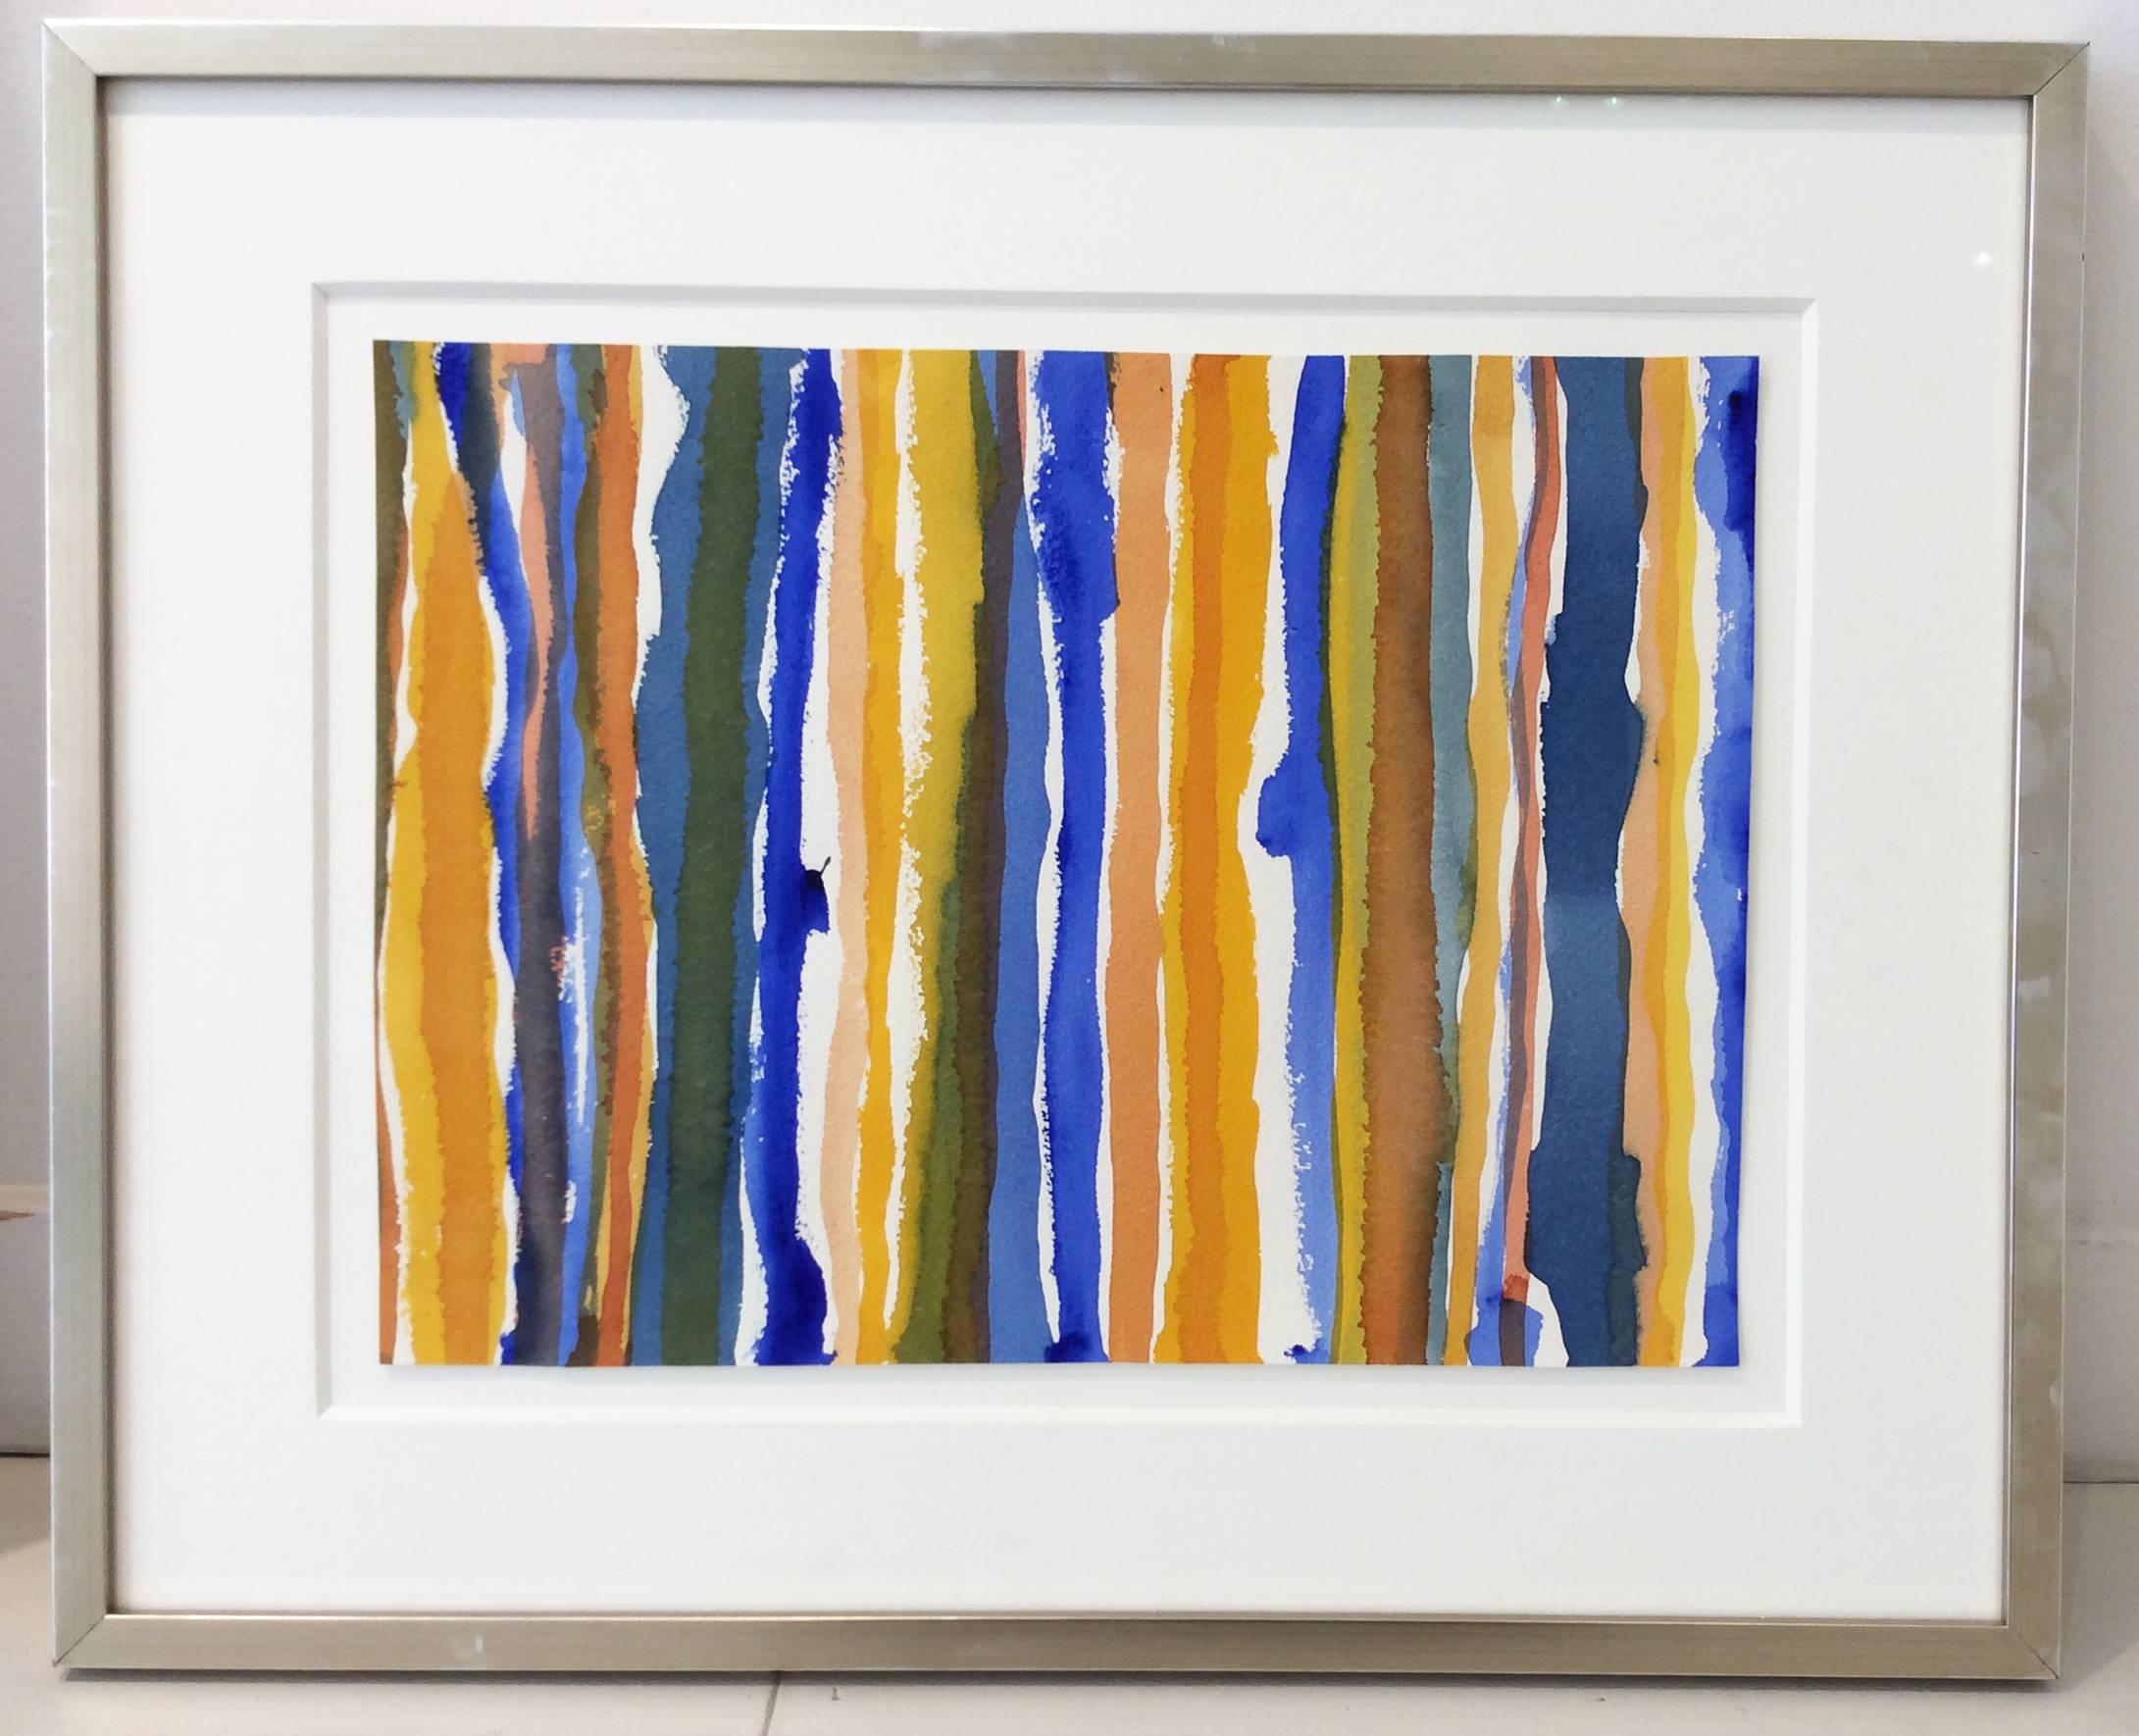 Untitled 012 (Framed Blue and Yellow Striped Watercolor Painting c. 1960) - Art by Edward Avedisian